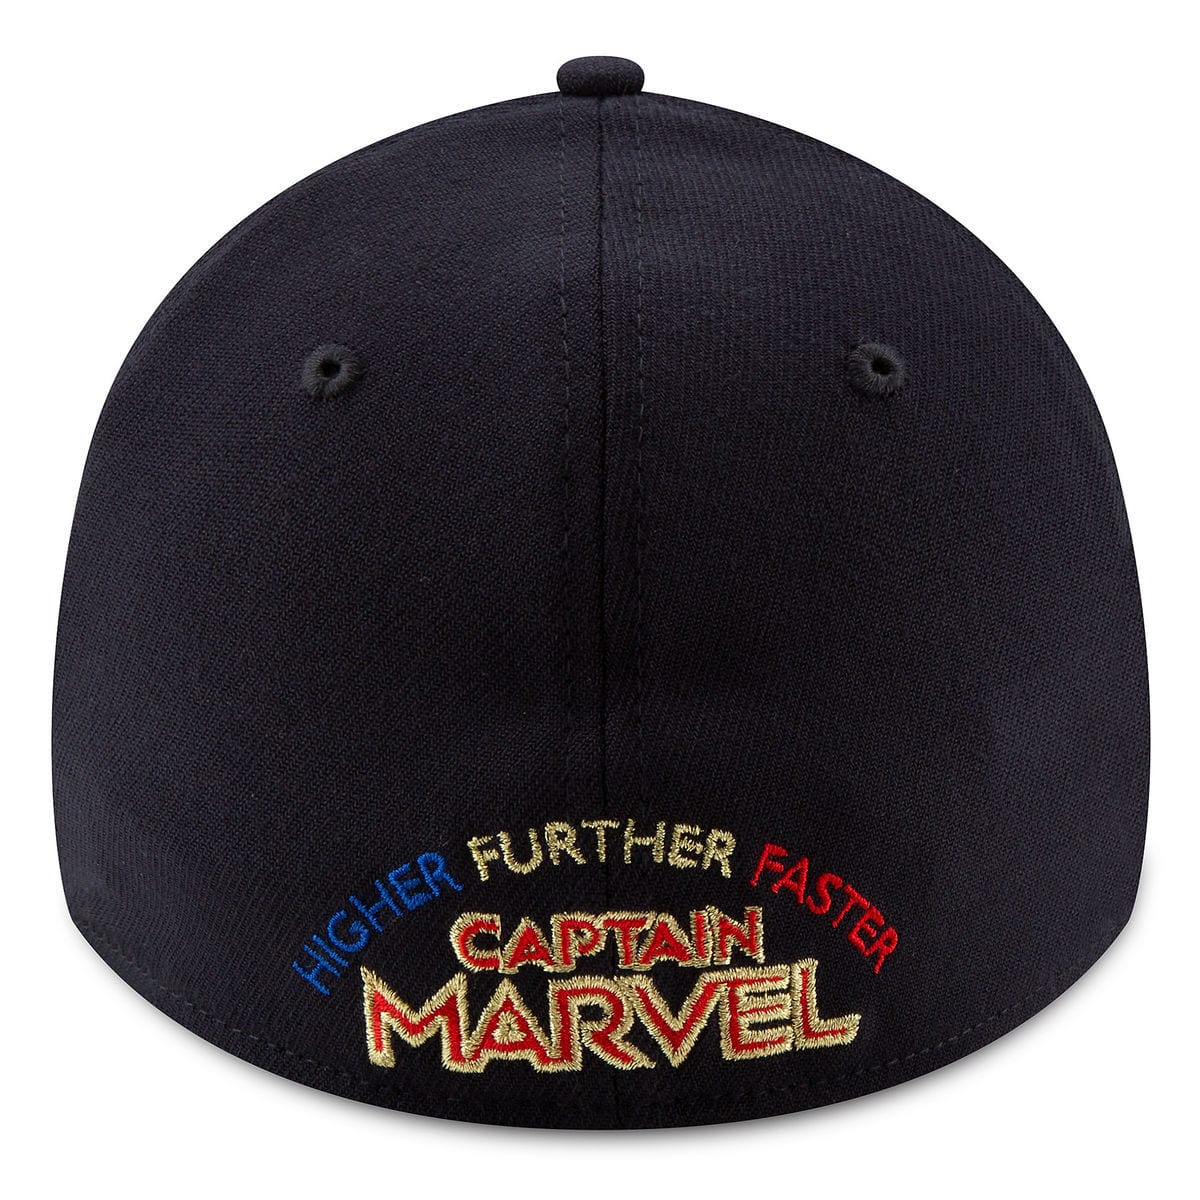 Disney Marvel Captain Marvel Crew Cap Collection Limited Edition New Box